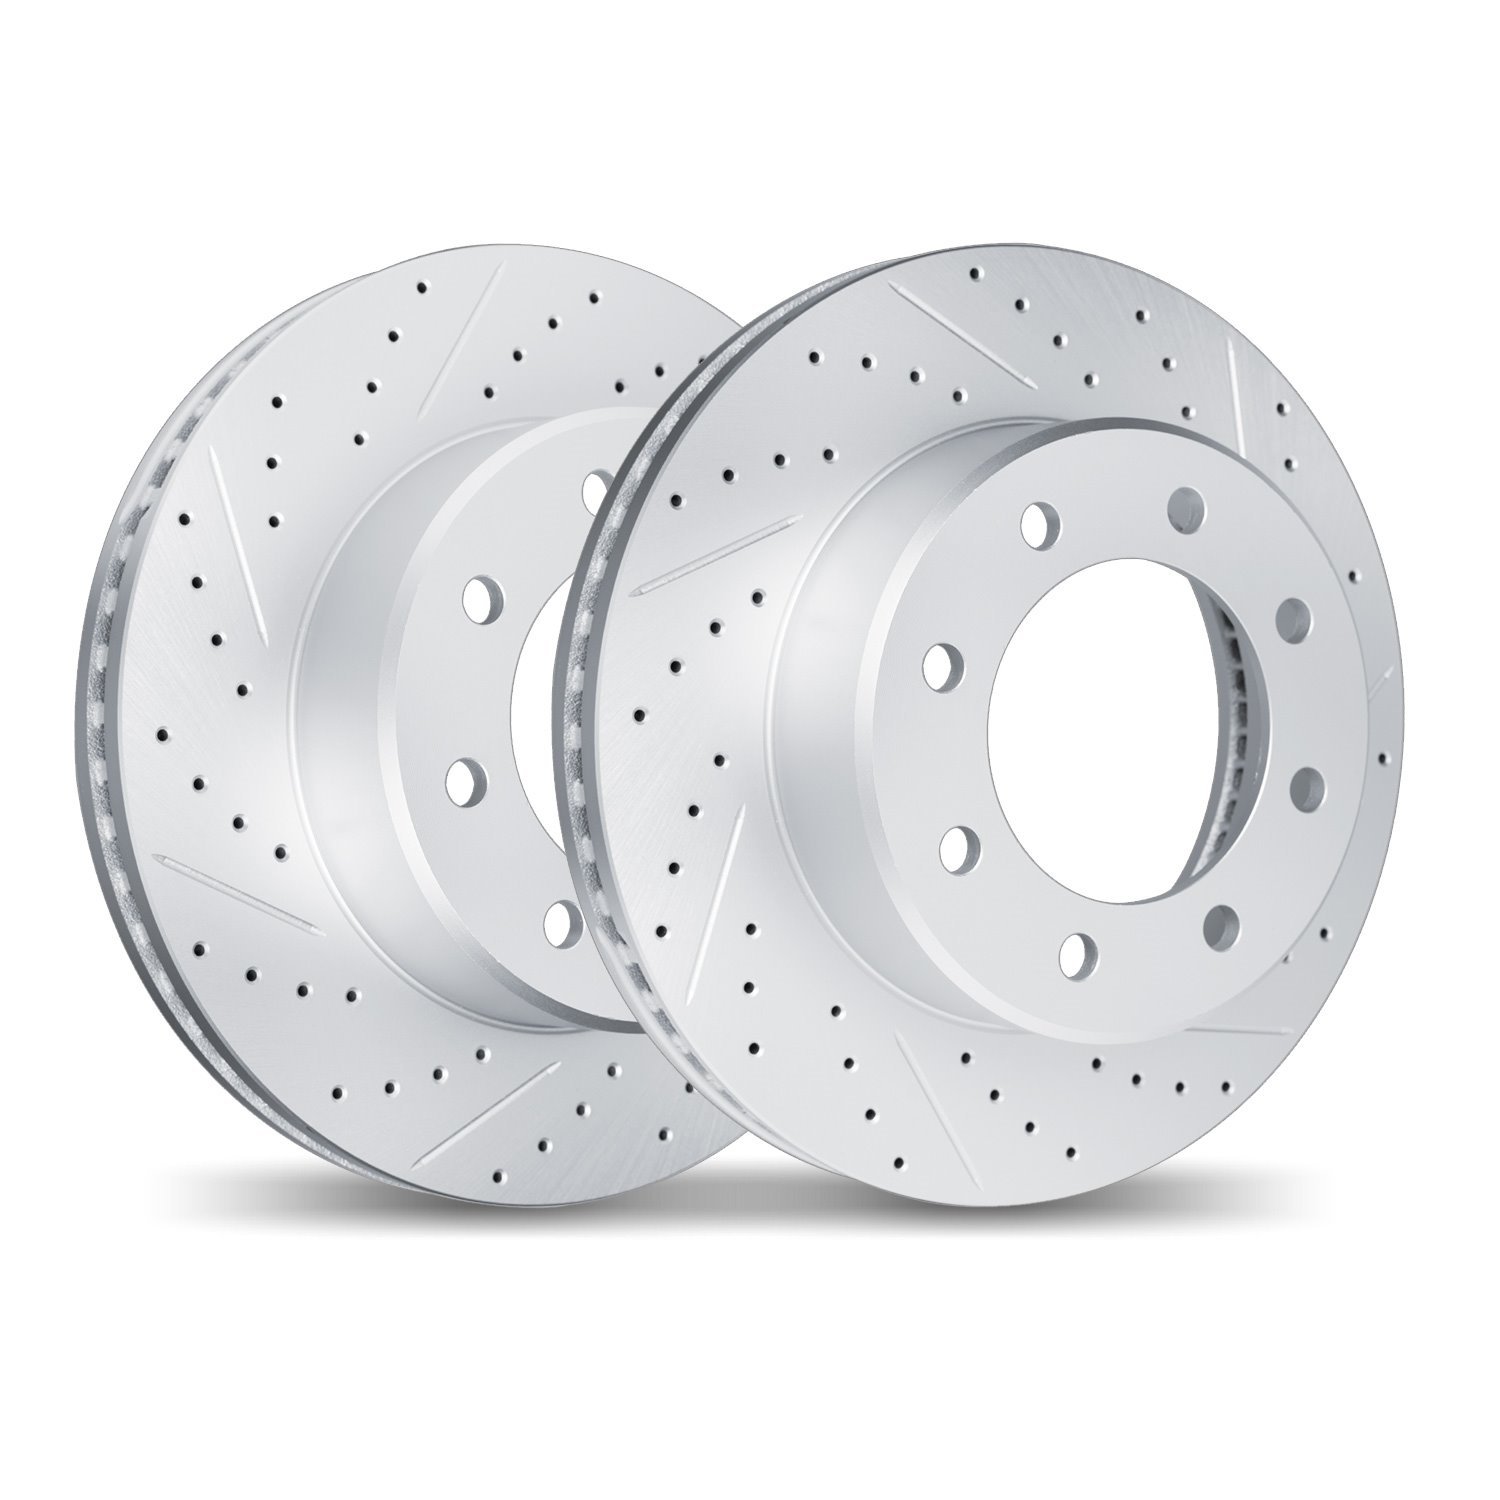 2002-48047 Geoperformance Drilled/Slotted Brake Rotors, 2011-2019 GM, Position: Rear